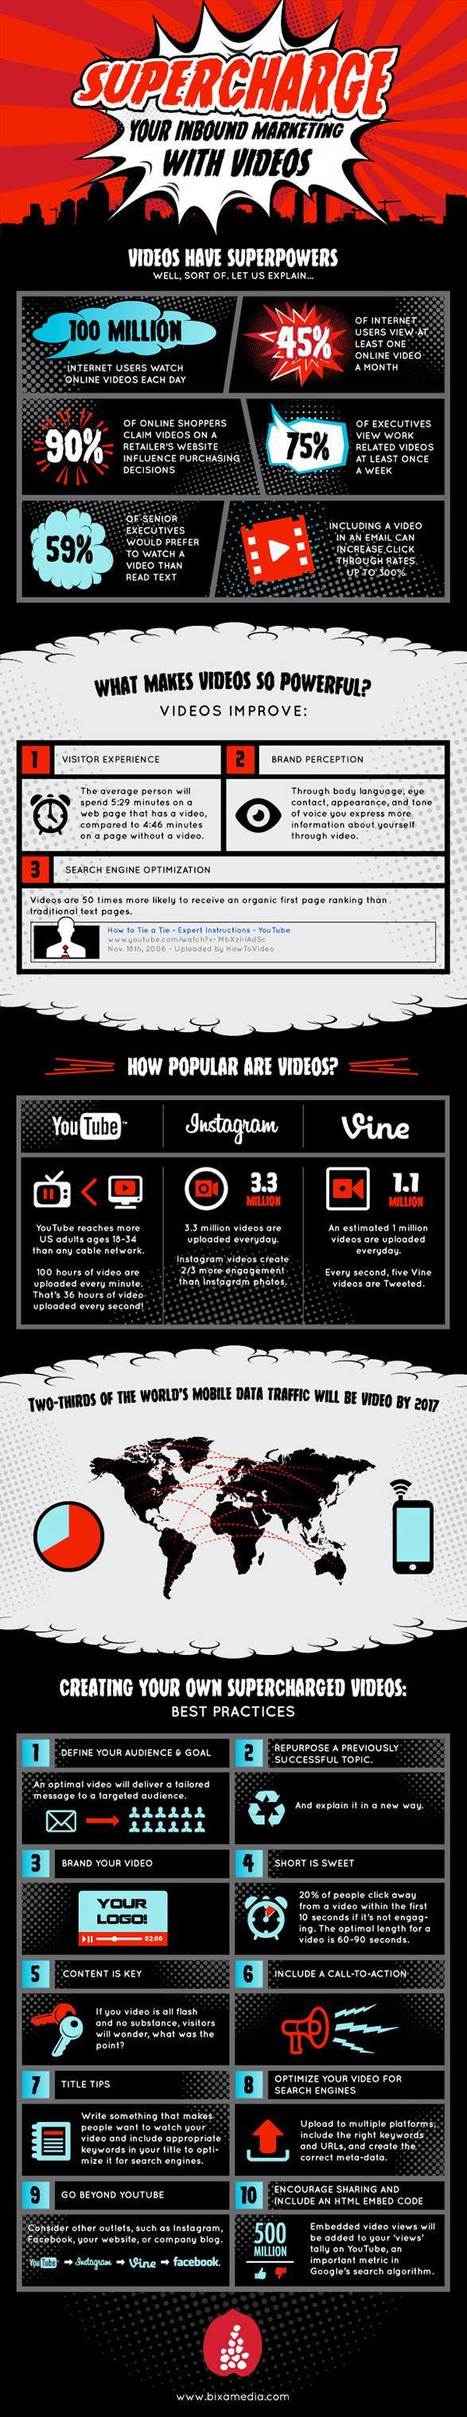 #Infographic: How to supercharge your inbound #marketing using videos - The Hub | Business Improvement and Social media | Scoop.it